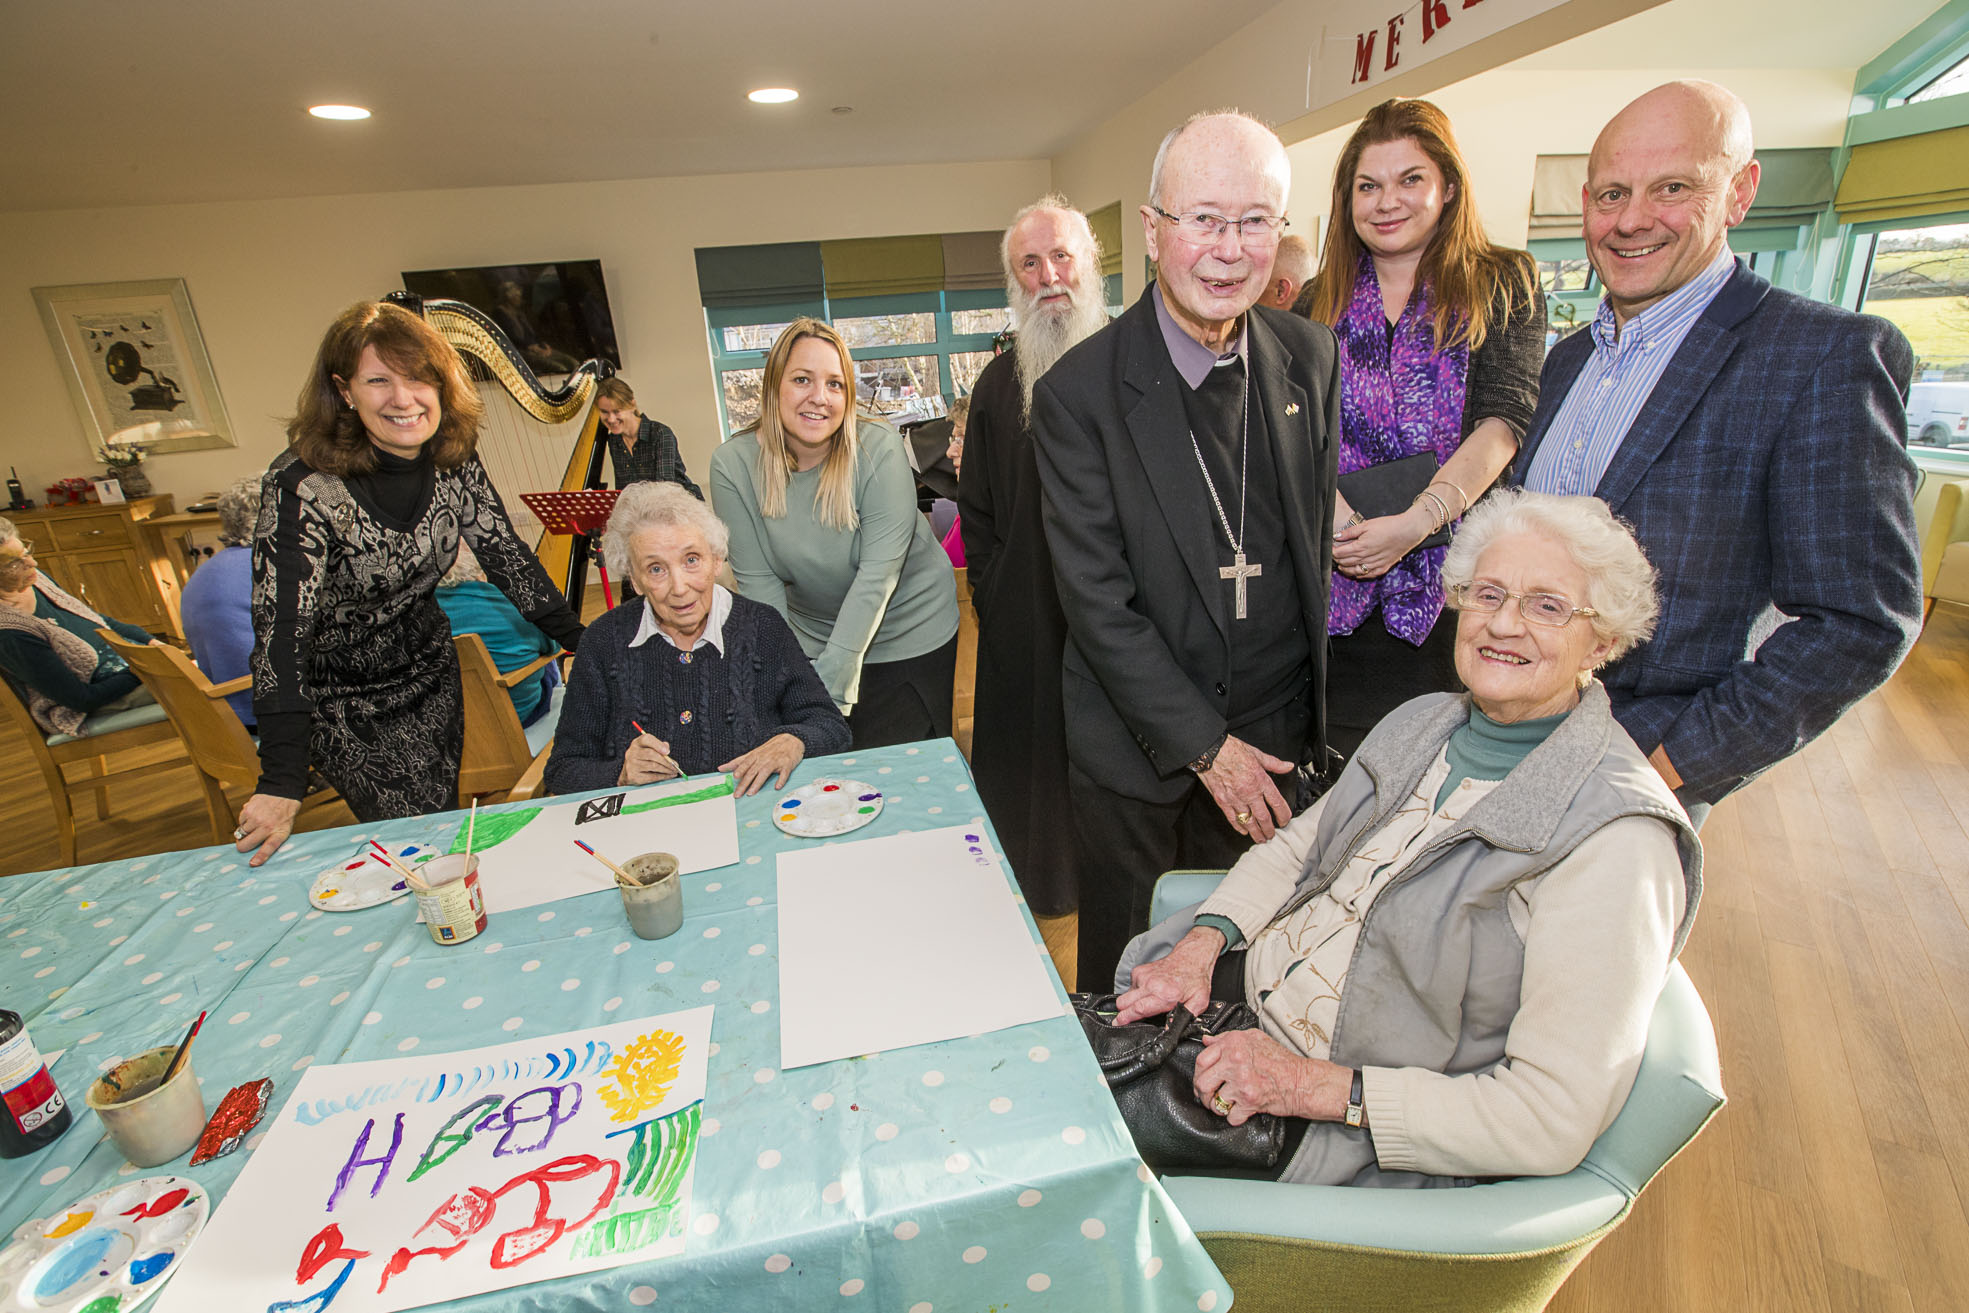 Dementia care centre of excellence is given official blessing by two top church leaders